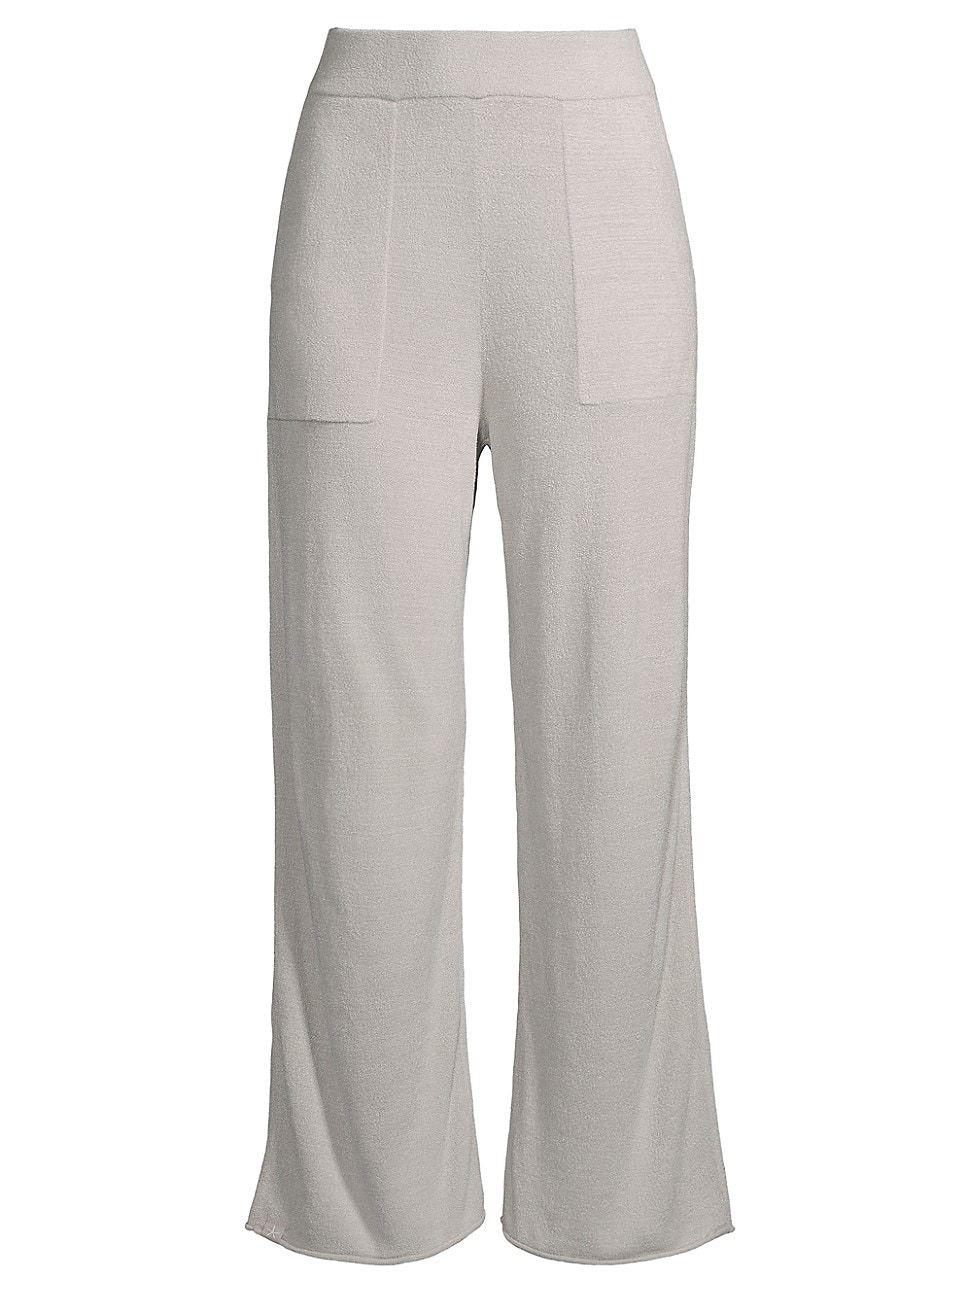 Women's The Cozy Chic Ultra Light Pants - Oyster - Size Large | Saks Fifth Avenue